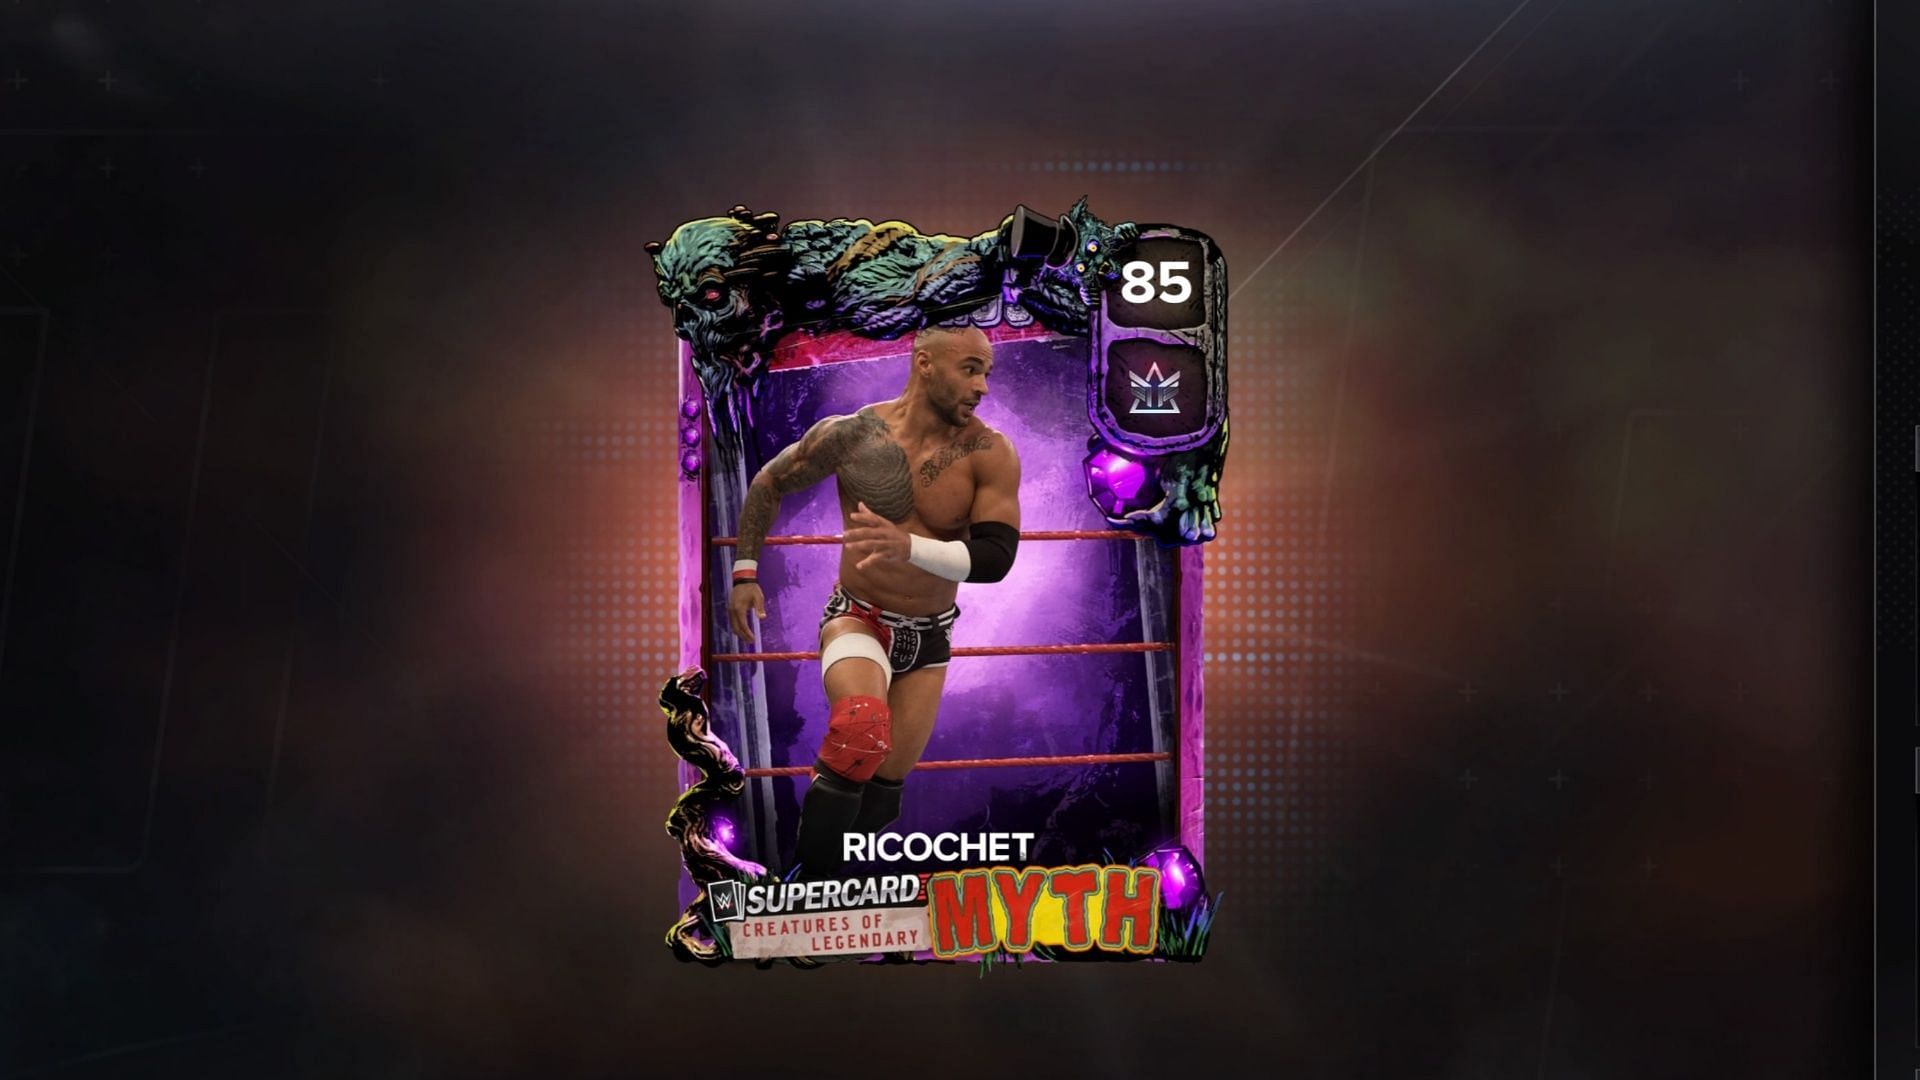 This new Amethyst Ricochet card can be added in WWE 2K23 for free (Image via 2K)